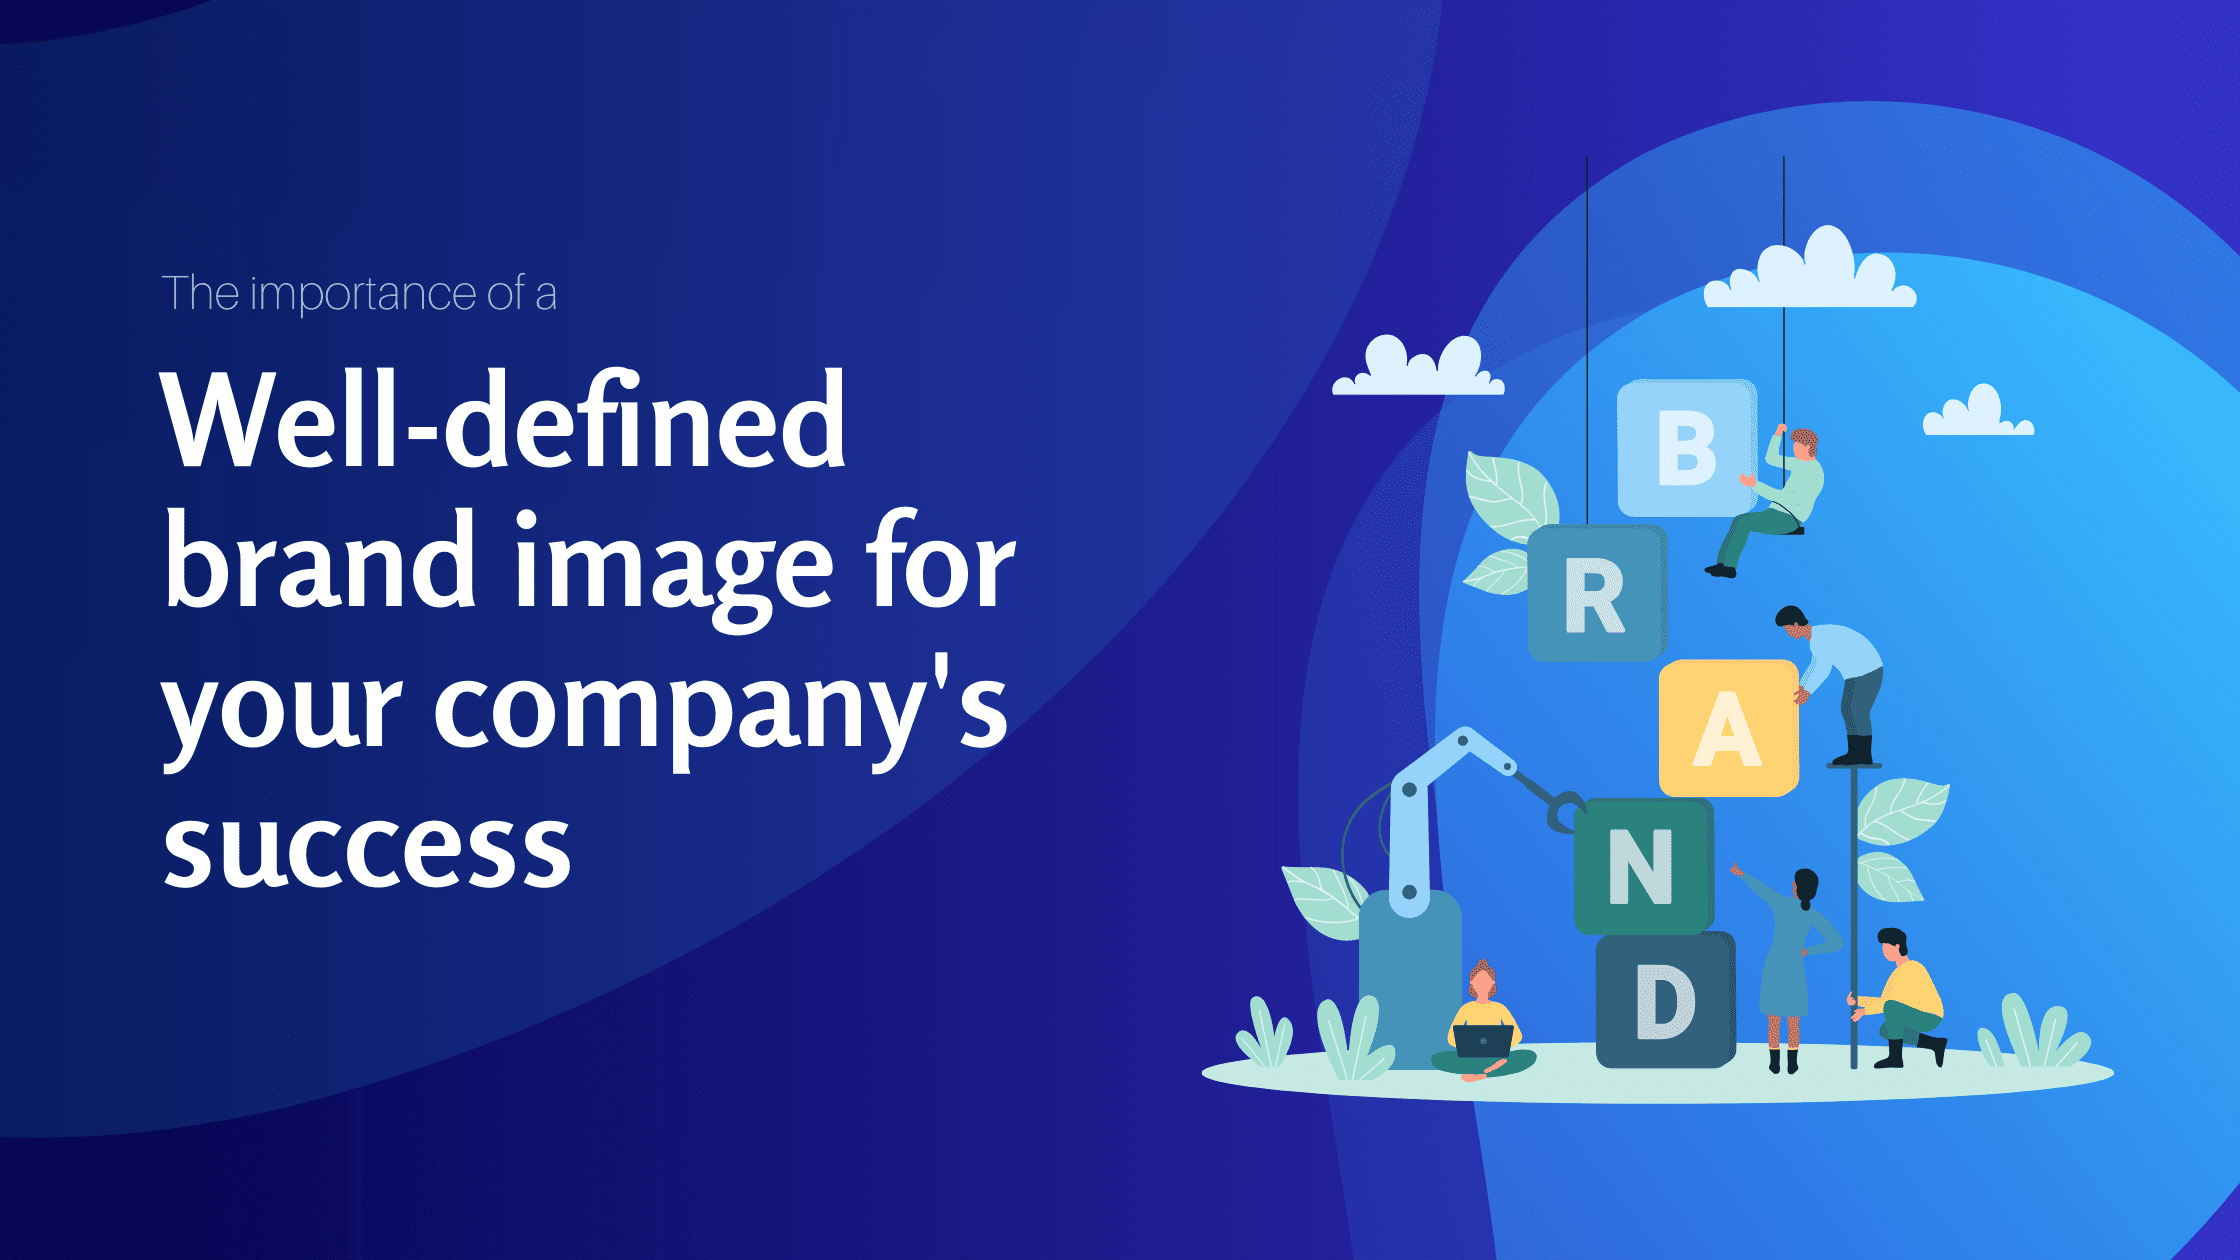 The importance of a well-defined brand image for your company's success - Konectiz